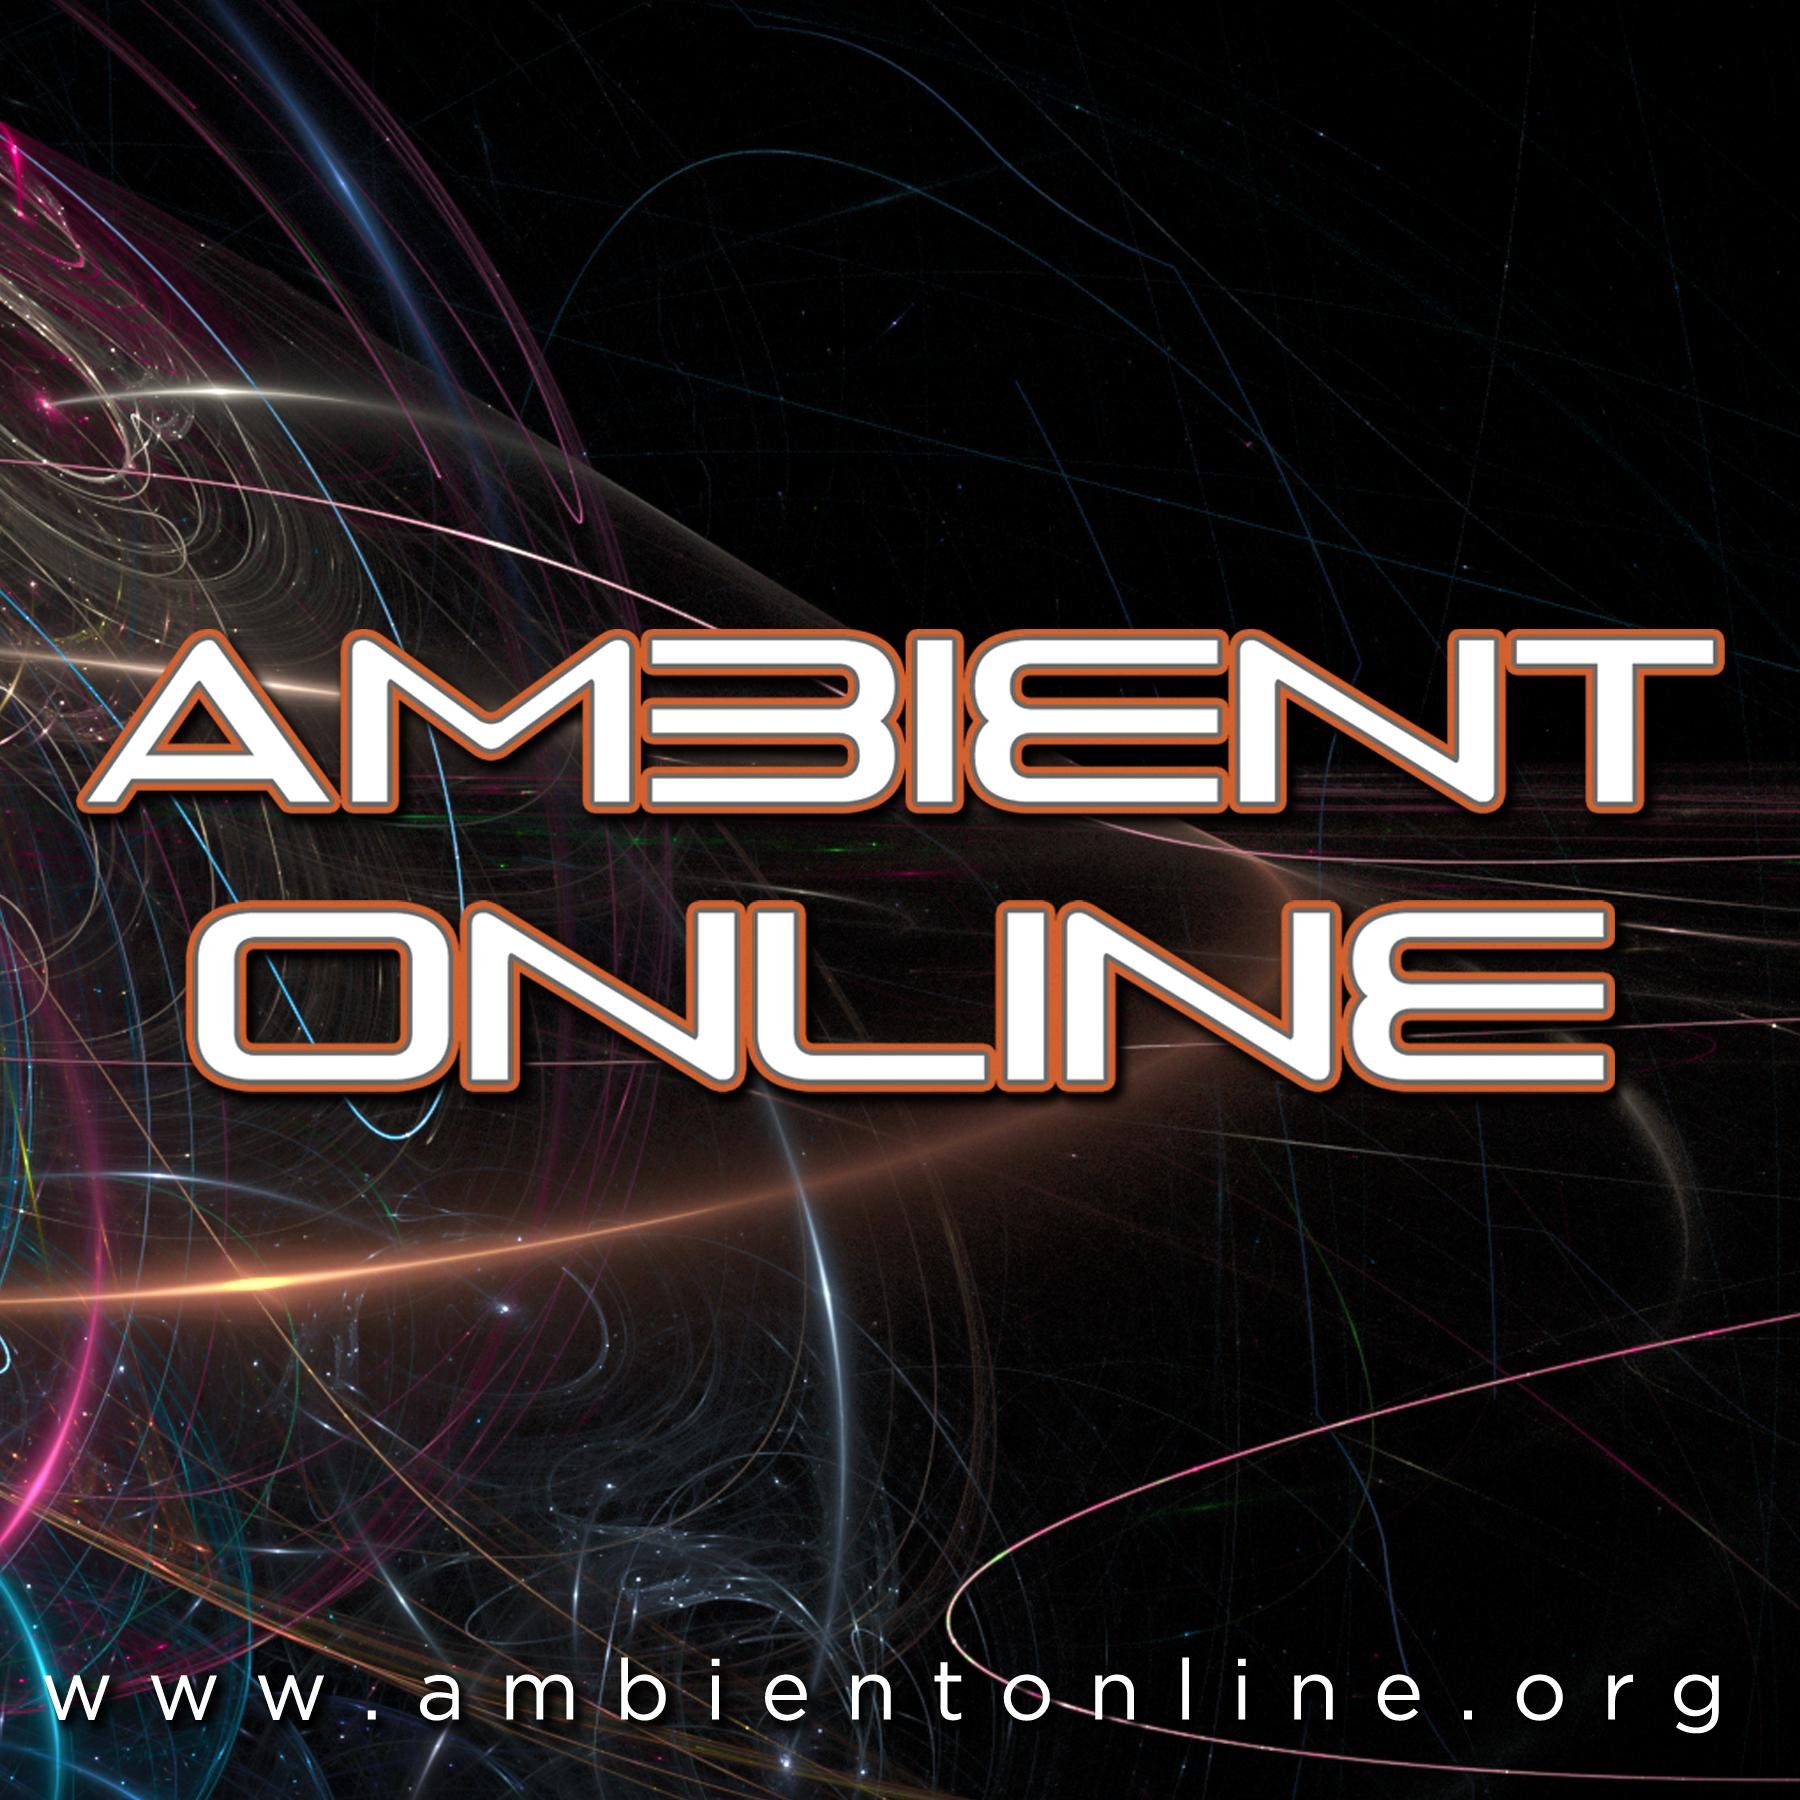 The forum for ambient music producers. Most active community for ambient music on the planet. Join us!